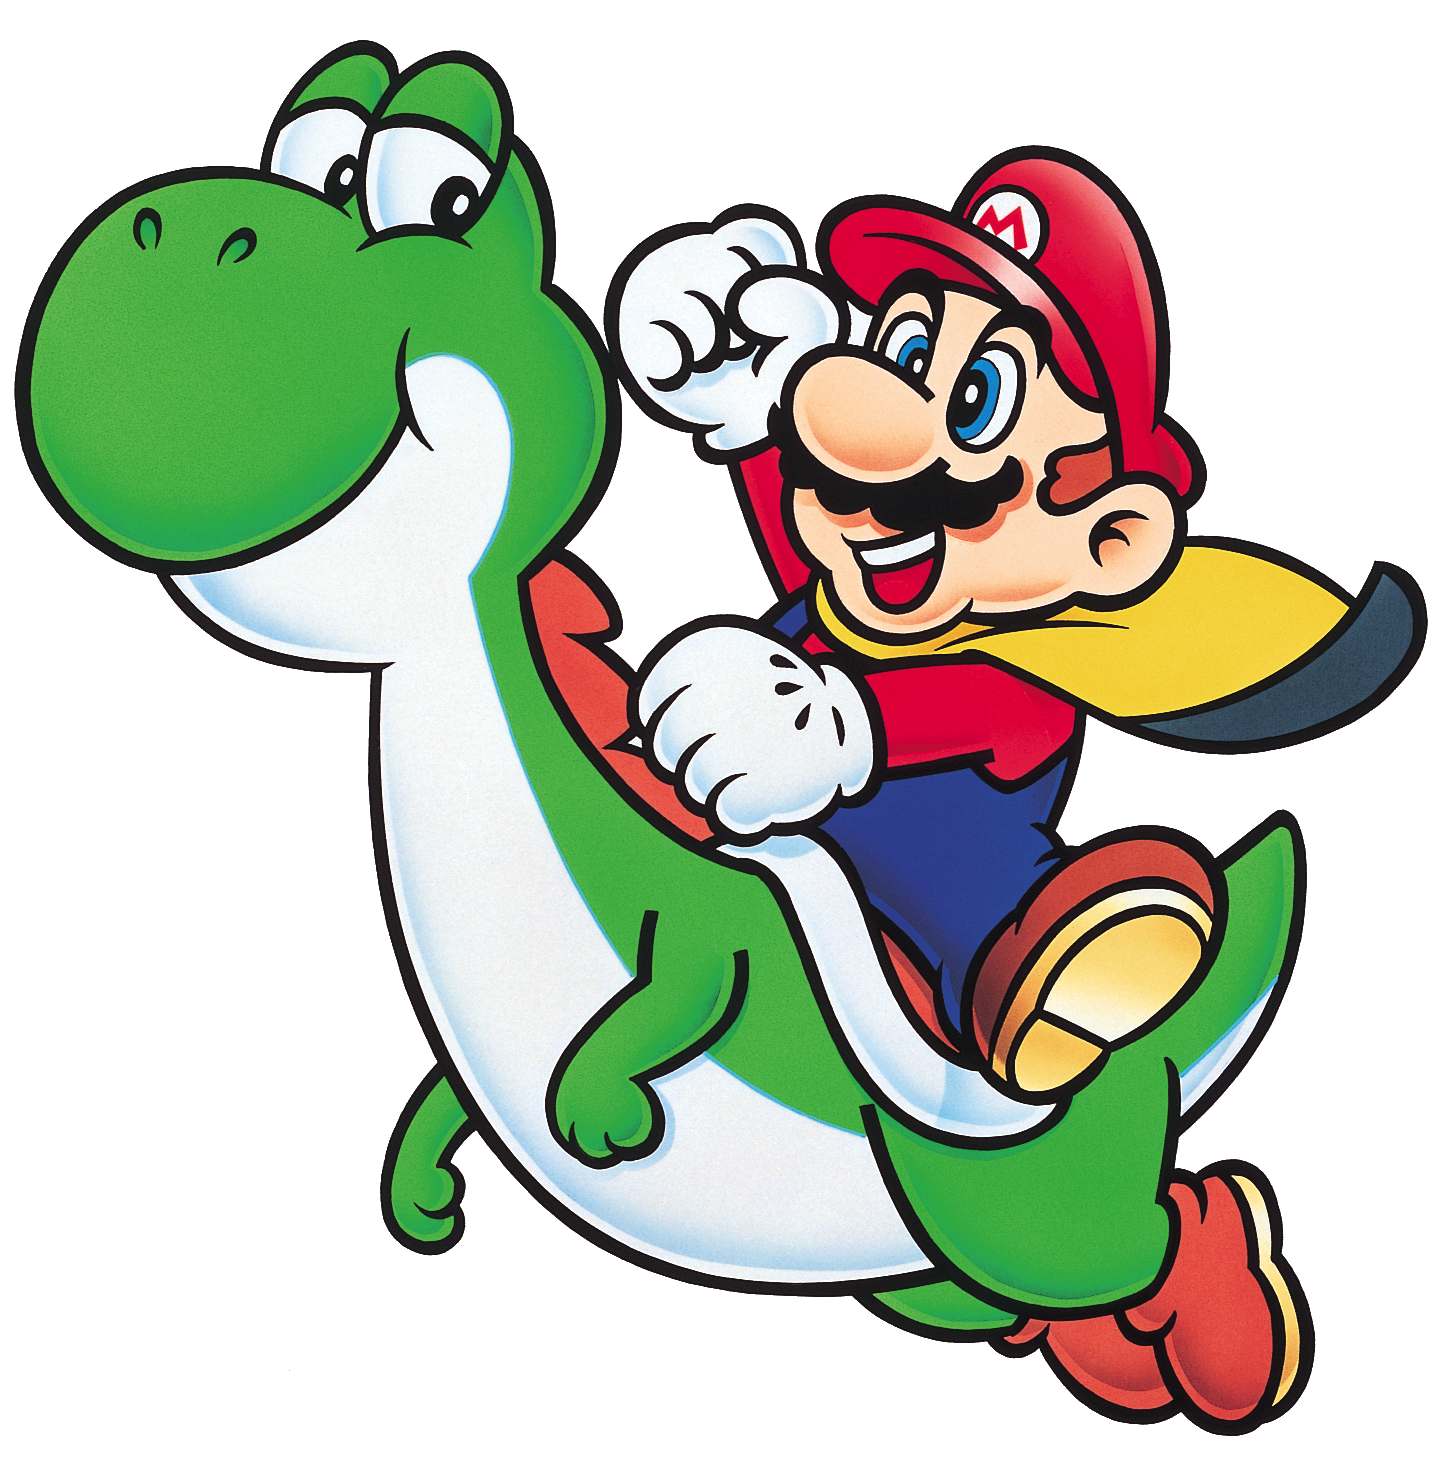 mario and yoshi  clipart best